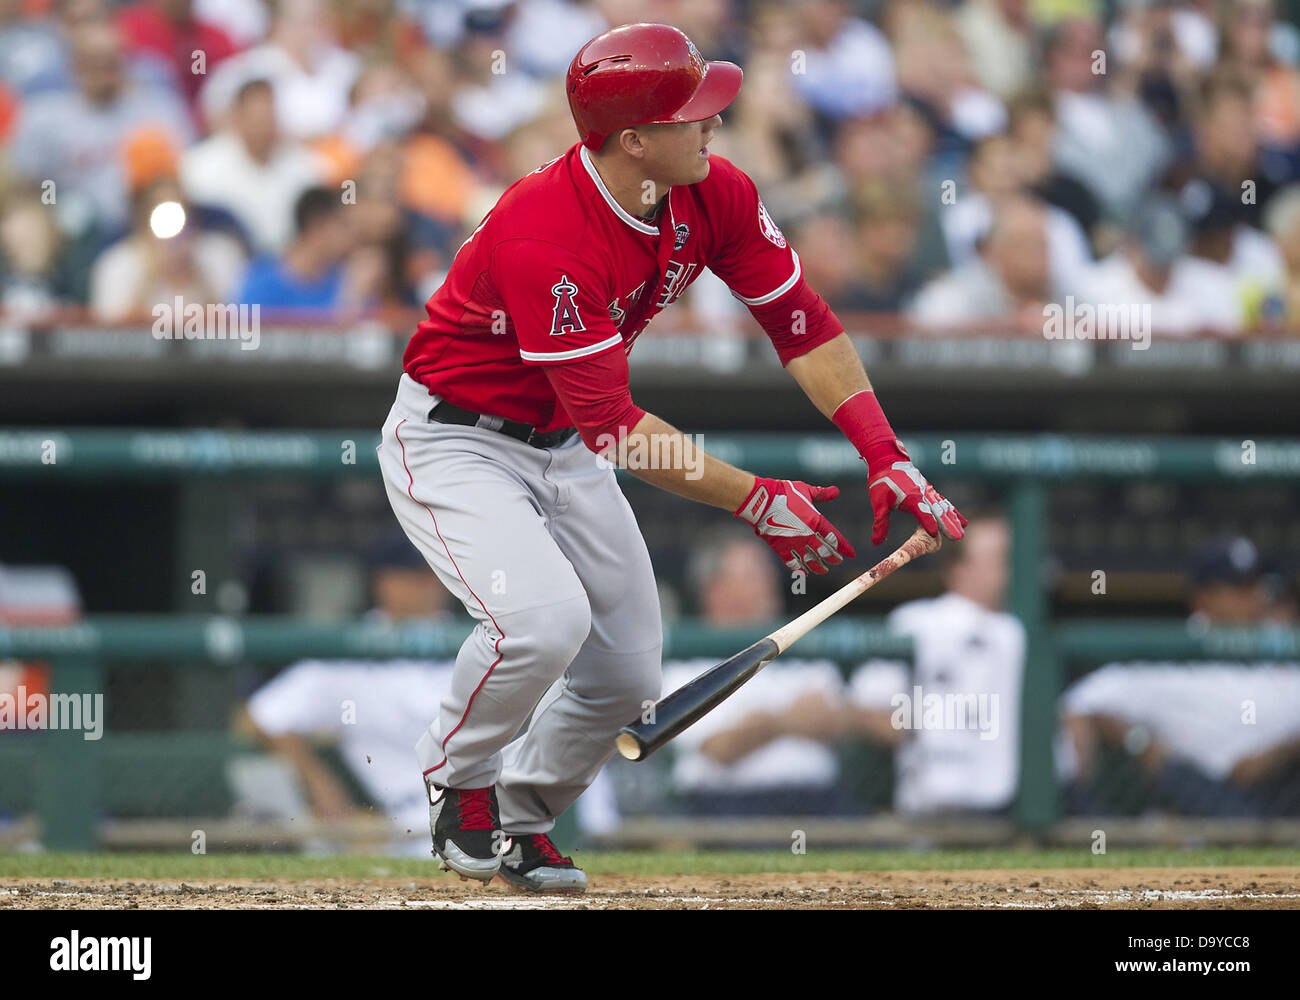 Detroit, Michigan, USA. 26th June 2013. Los Angeles Angels outfielder Mike Trout (27) at bat during MLB game action between the Los Angeles Angels and the Detroit Tigers at Comerica Park in Detroit, Michigan. The Angels defeated the Tigers 7-4. Credit:  Cal Sport Media/Alamy Live News Stock Photo